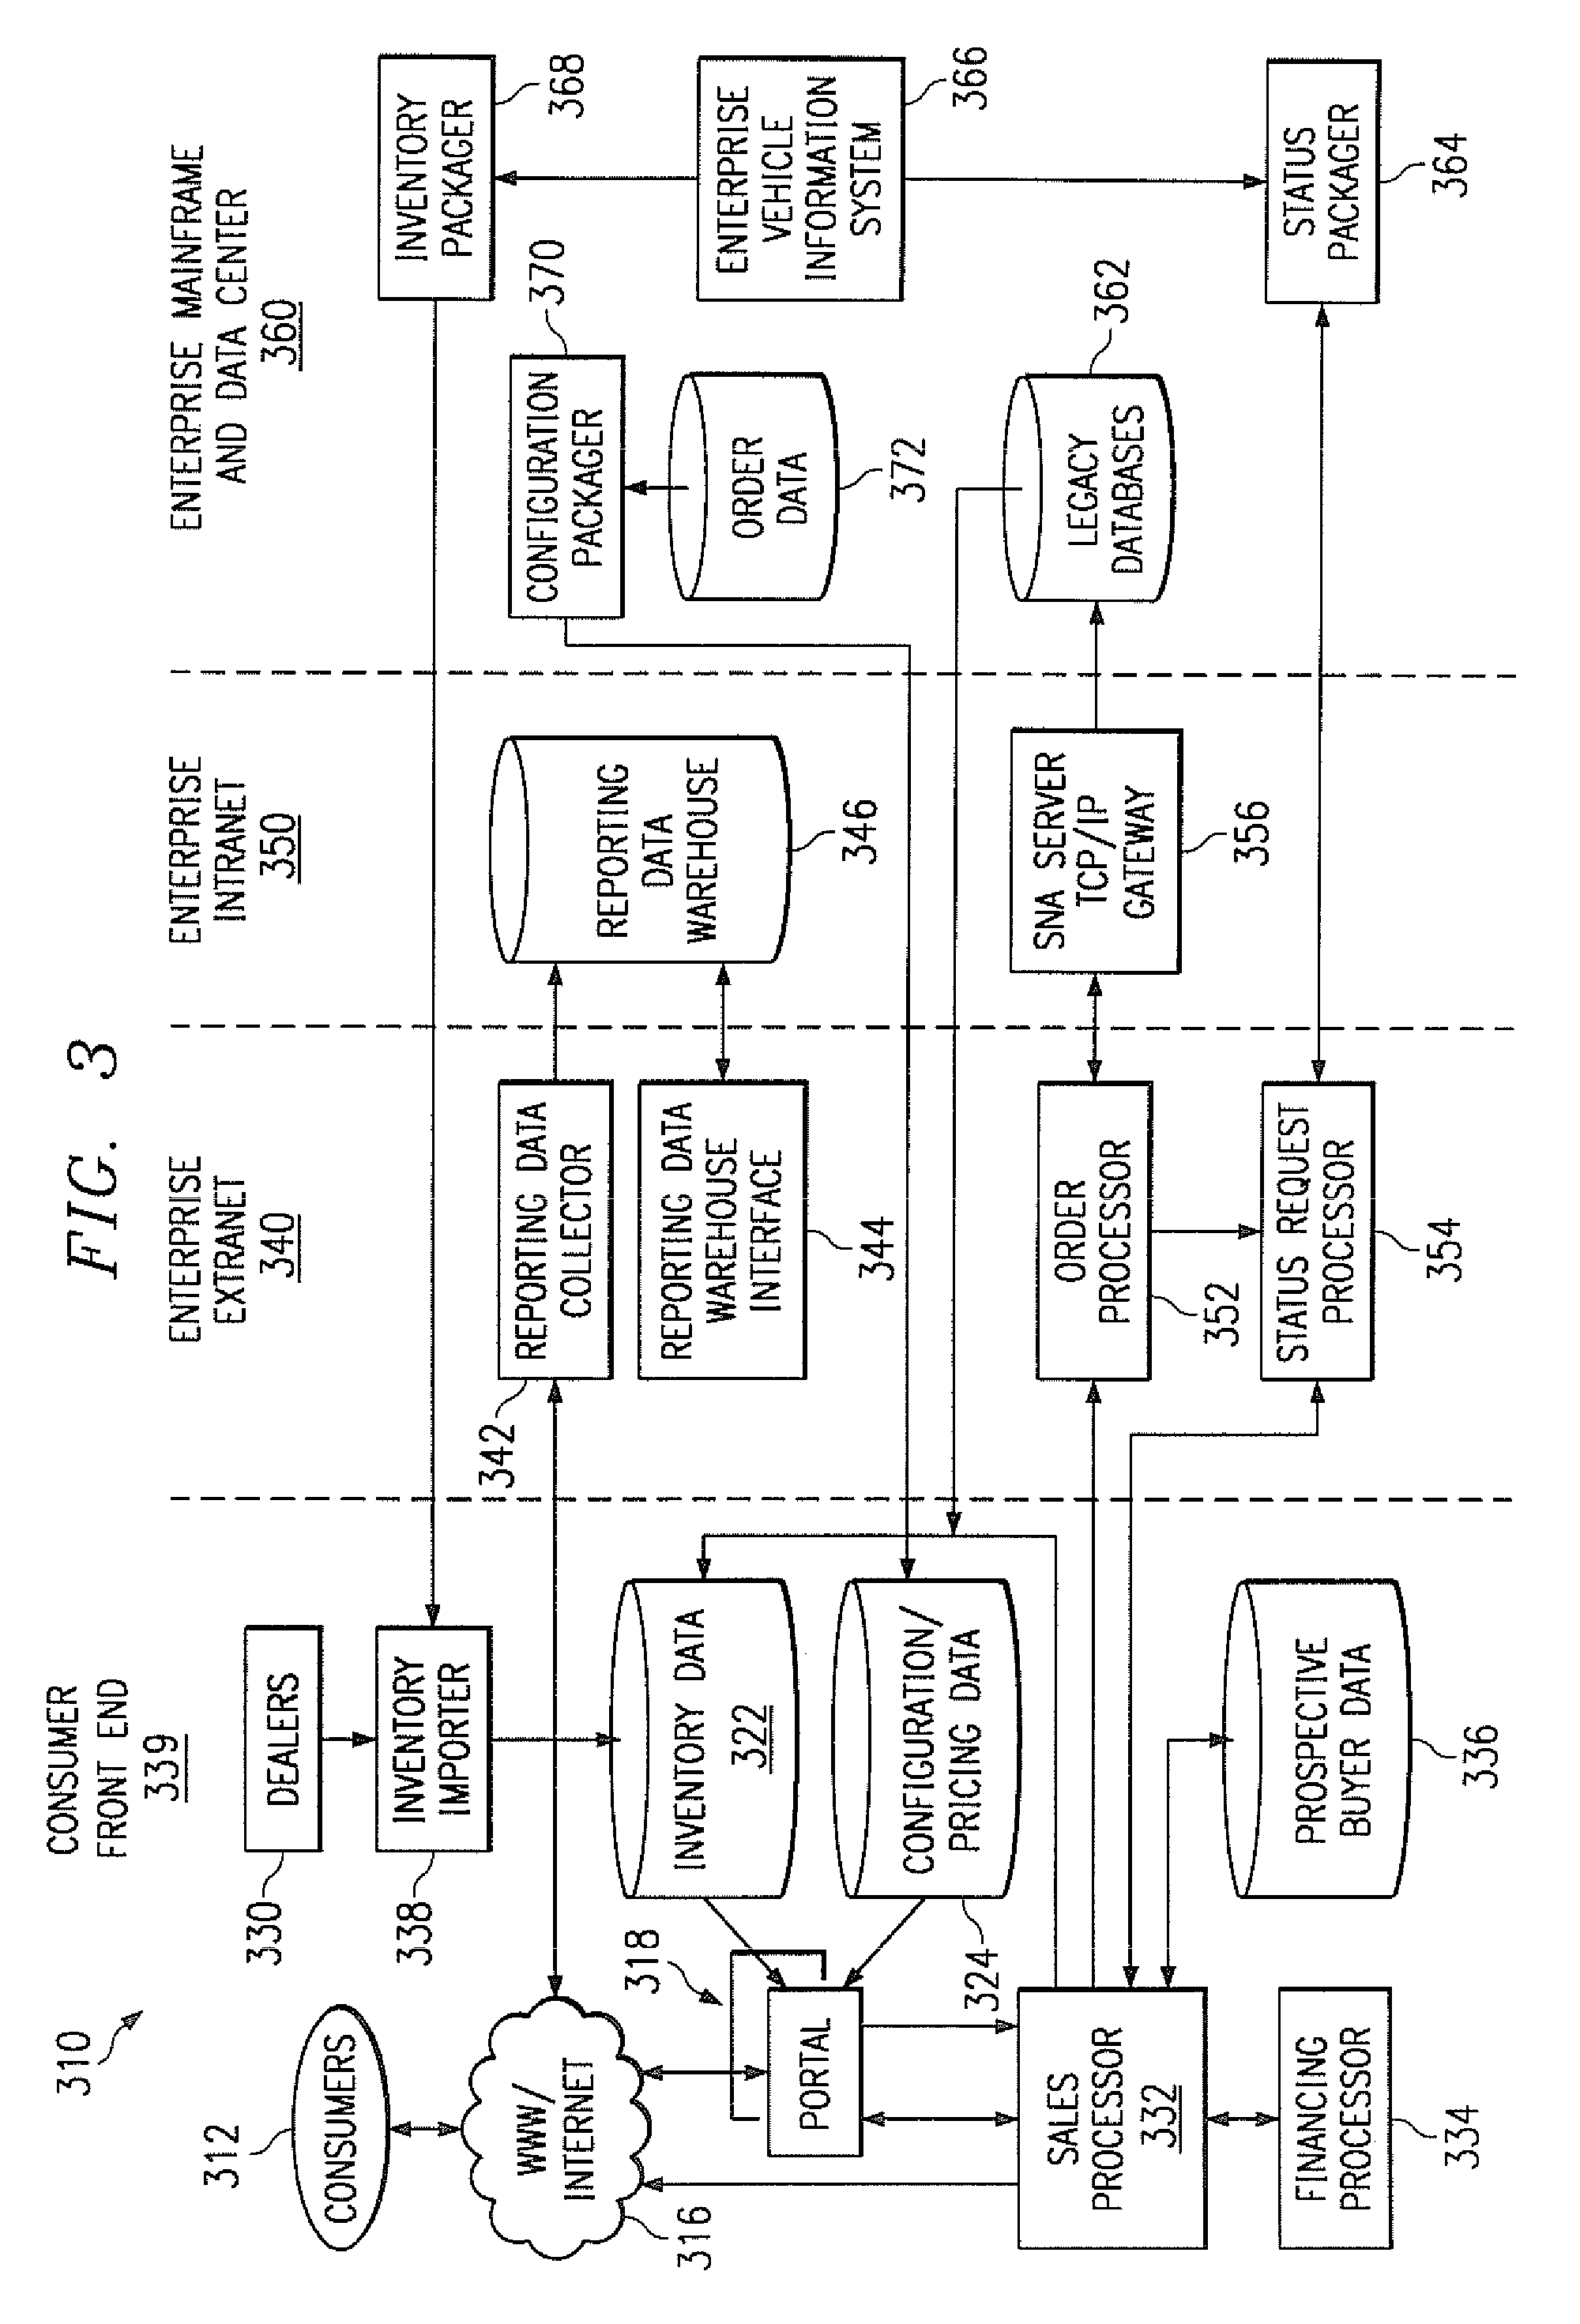 Method and system for configuring and ordering consumer product